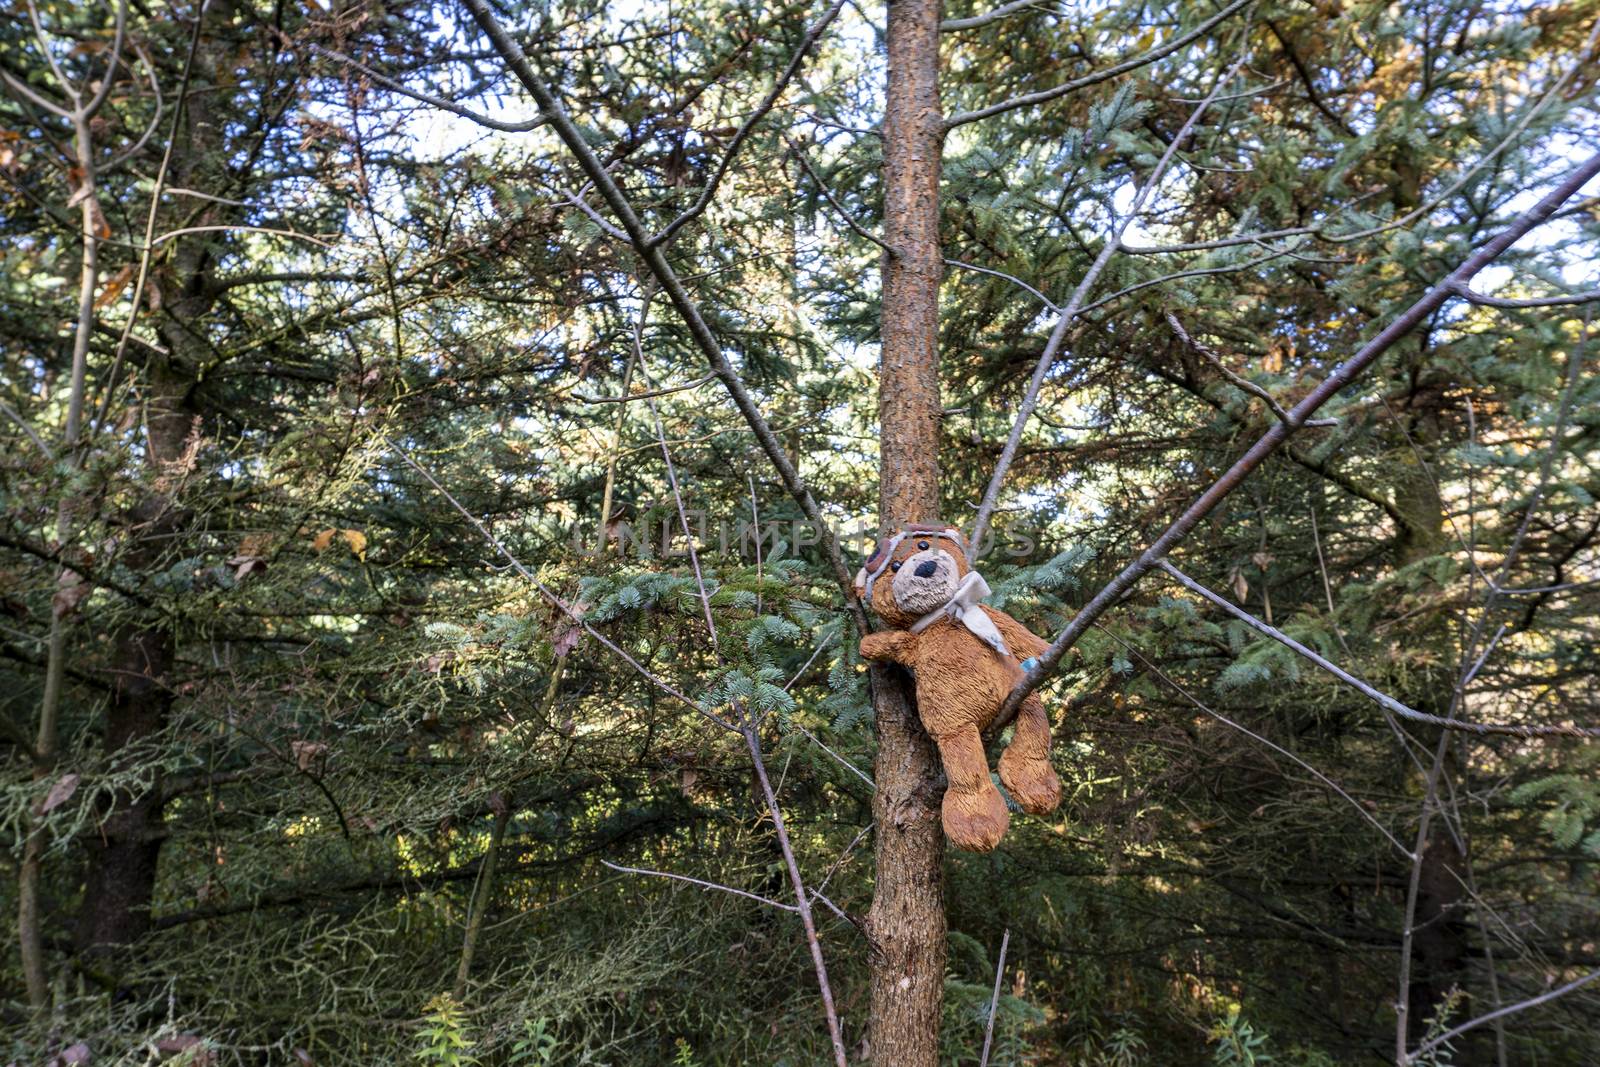 Forgotten toy bear in the forest by ben44